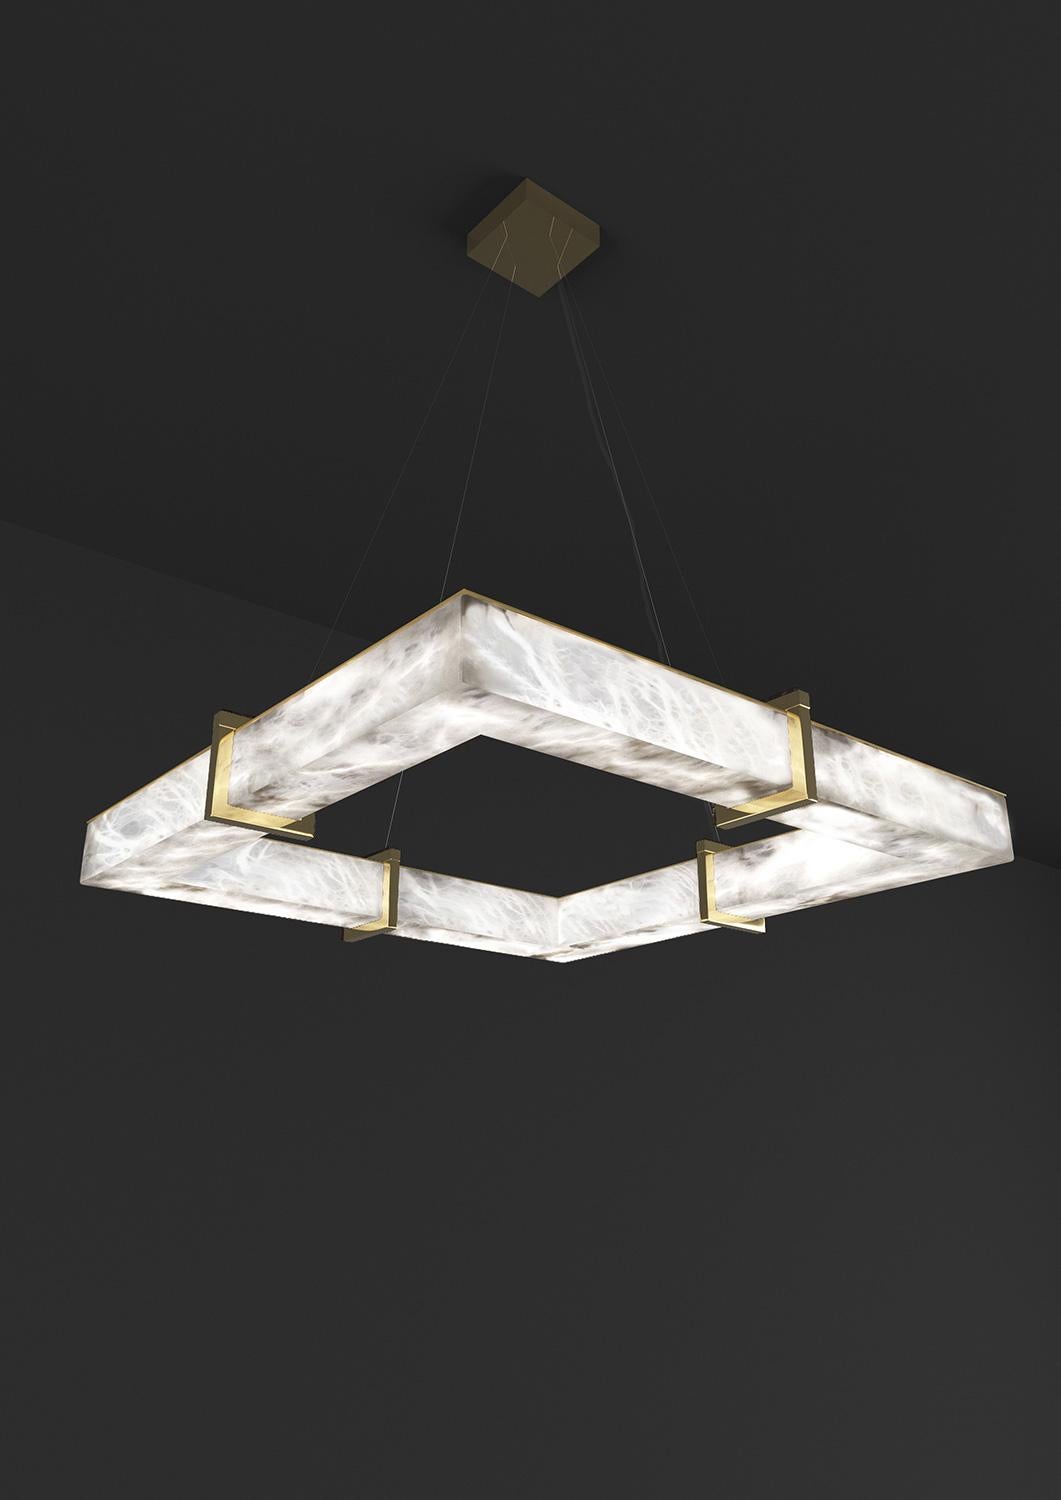 Talassa Shiny Gold Metal Pendant Lamp by Alabastro Italiano
Dimensions: D 80 x W 80 x H 11 cm.
Materials: White alabaster and metal.

Available in different finishes: Shiny Silver, Bronze, Brushed Brass, Ruggine of Florence, Brushed Burnished, Shiny